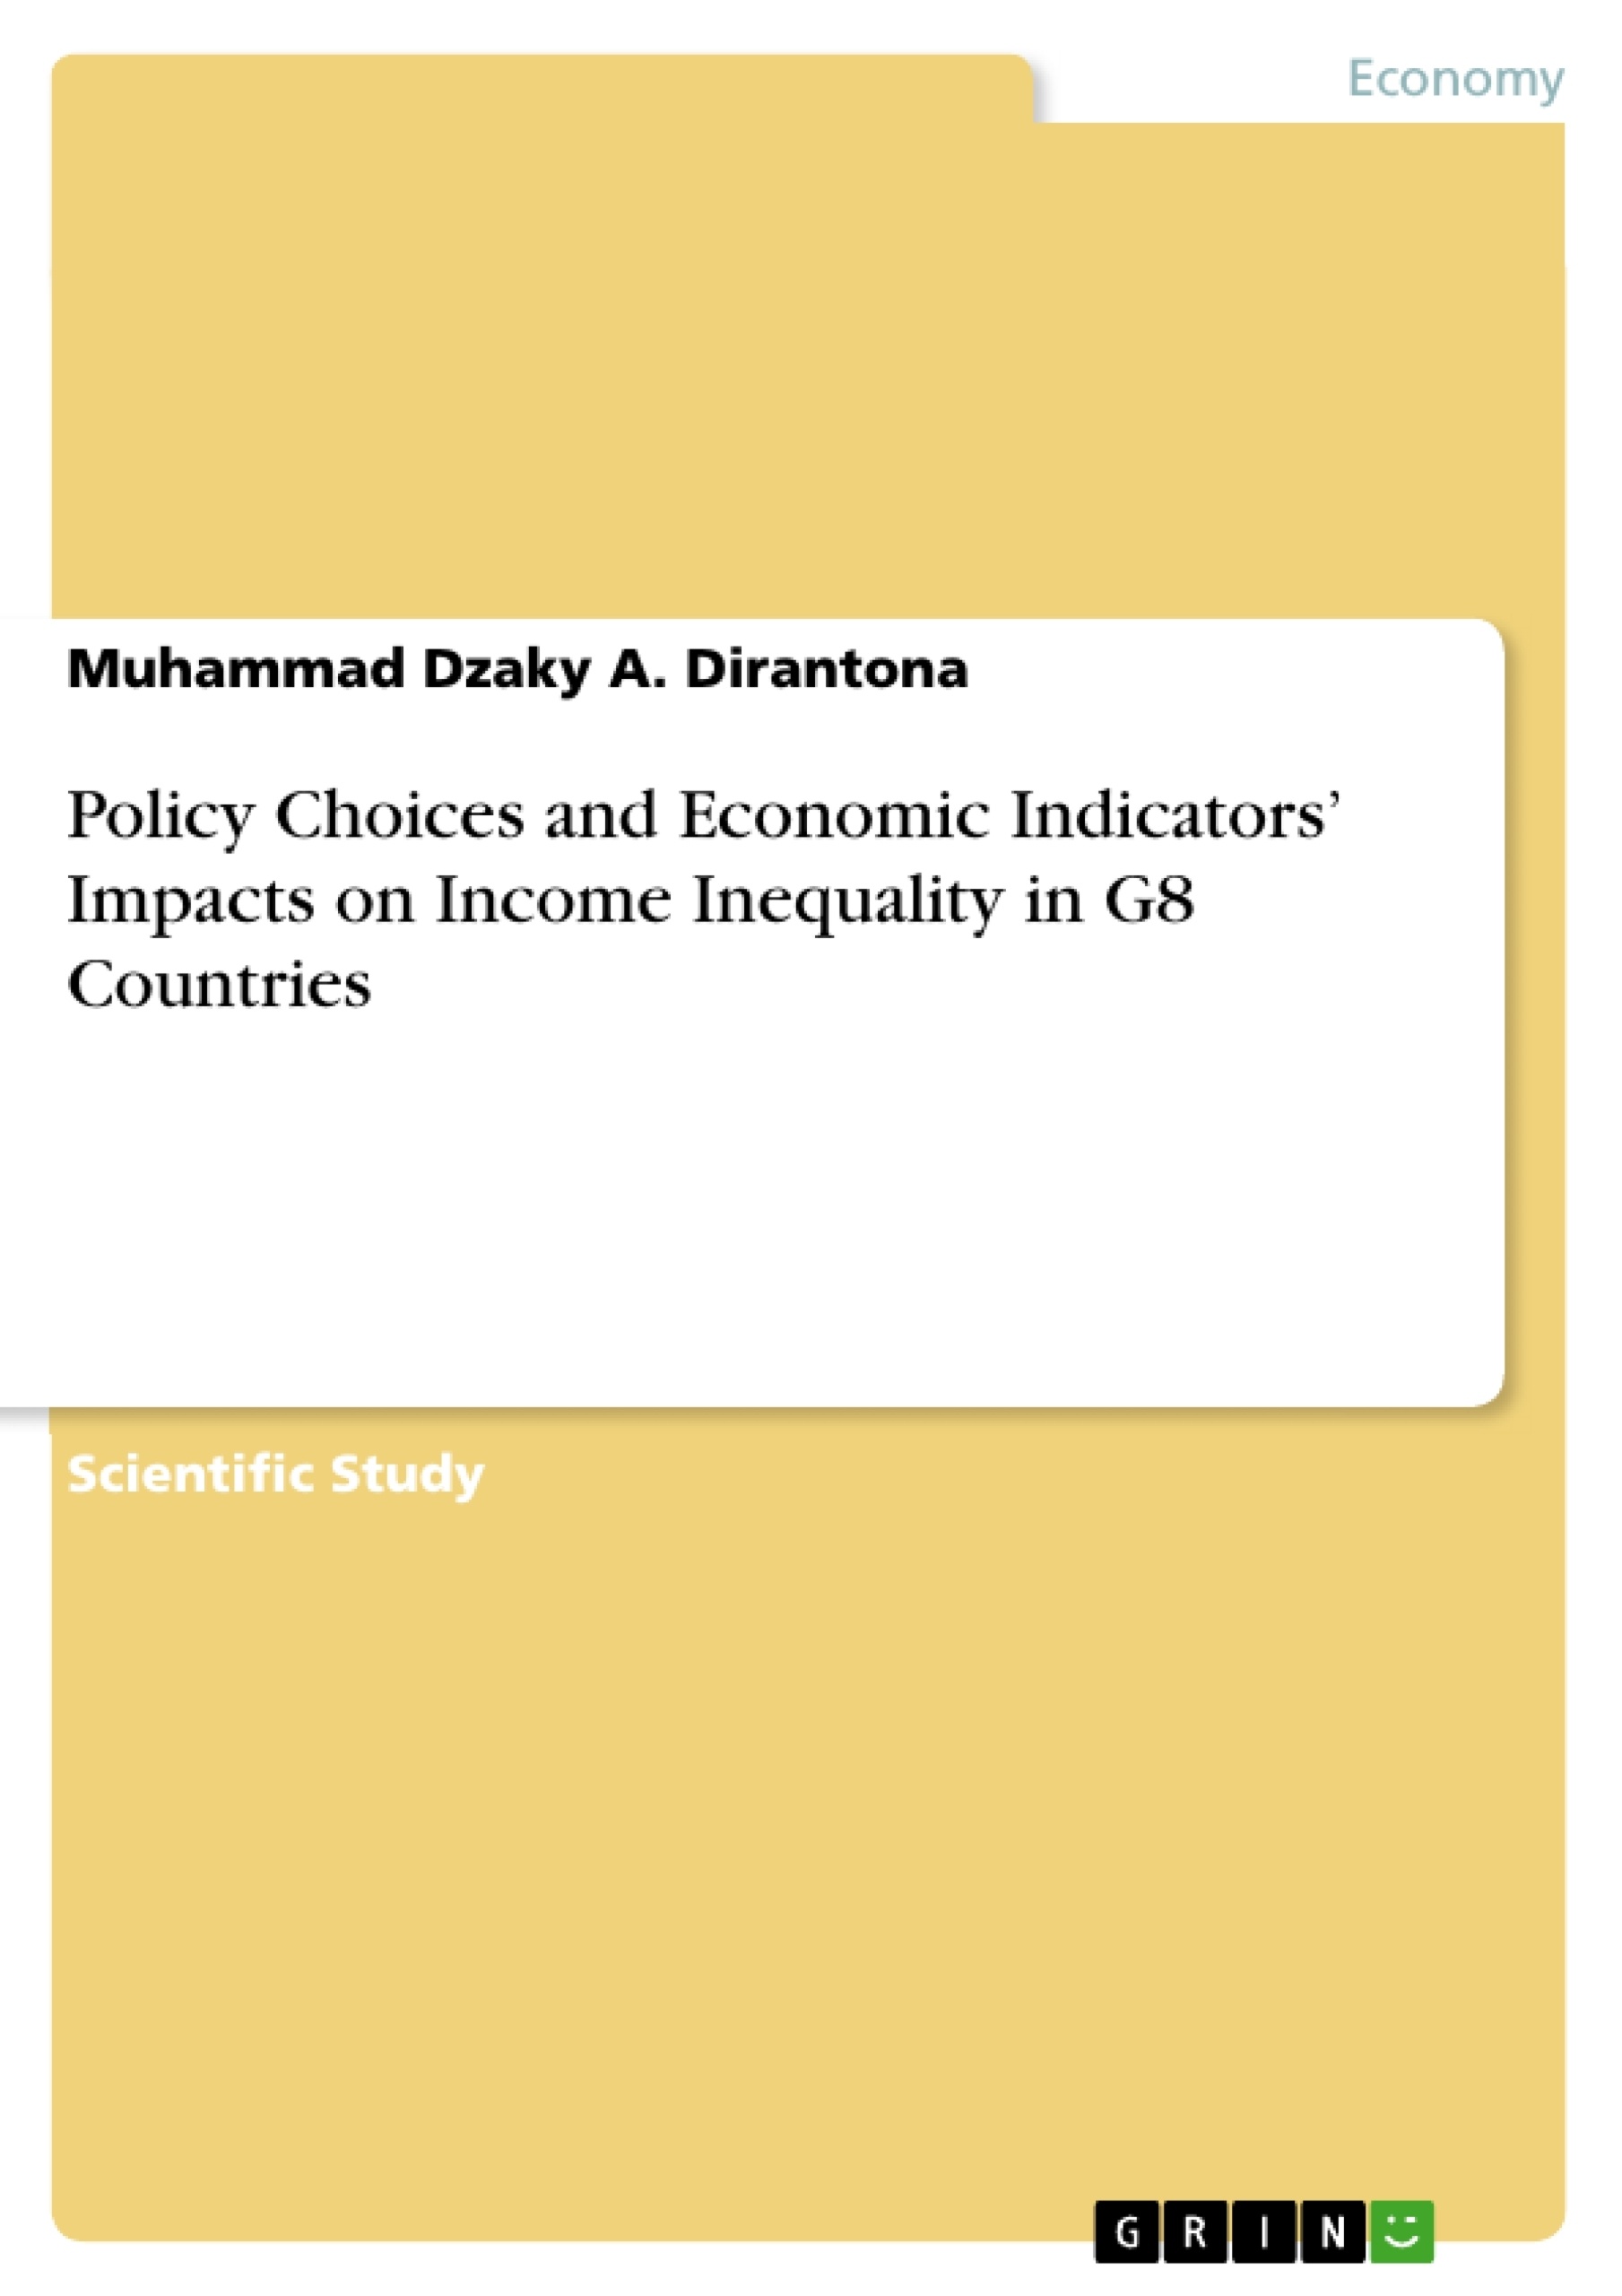 Title: Policy Choices and Economic Indicators’ Impacts on Income Inequality in G8 Countries